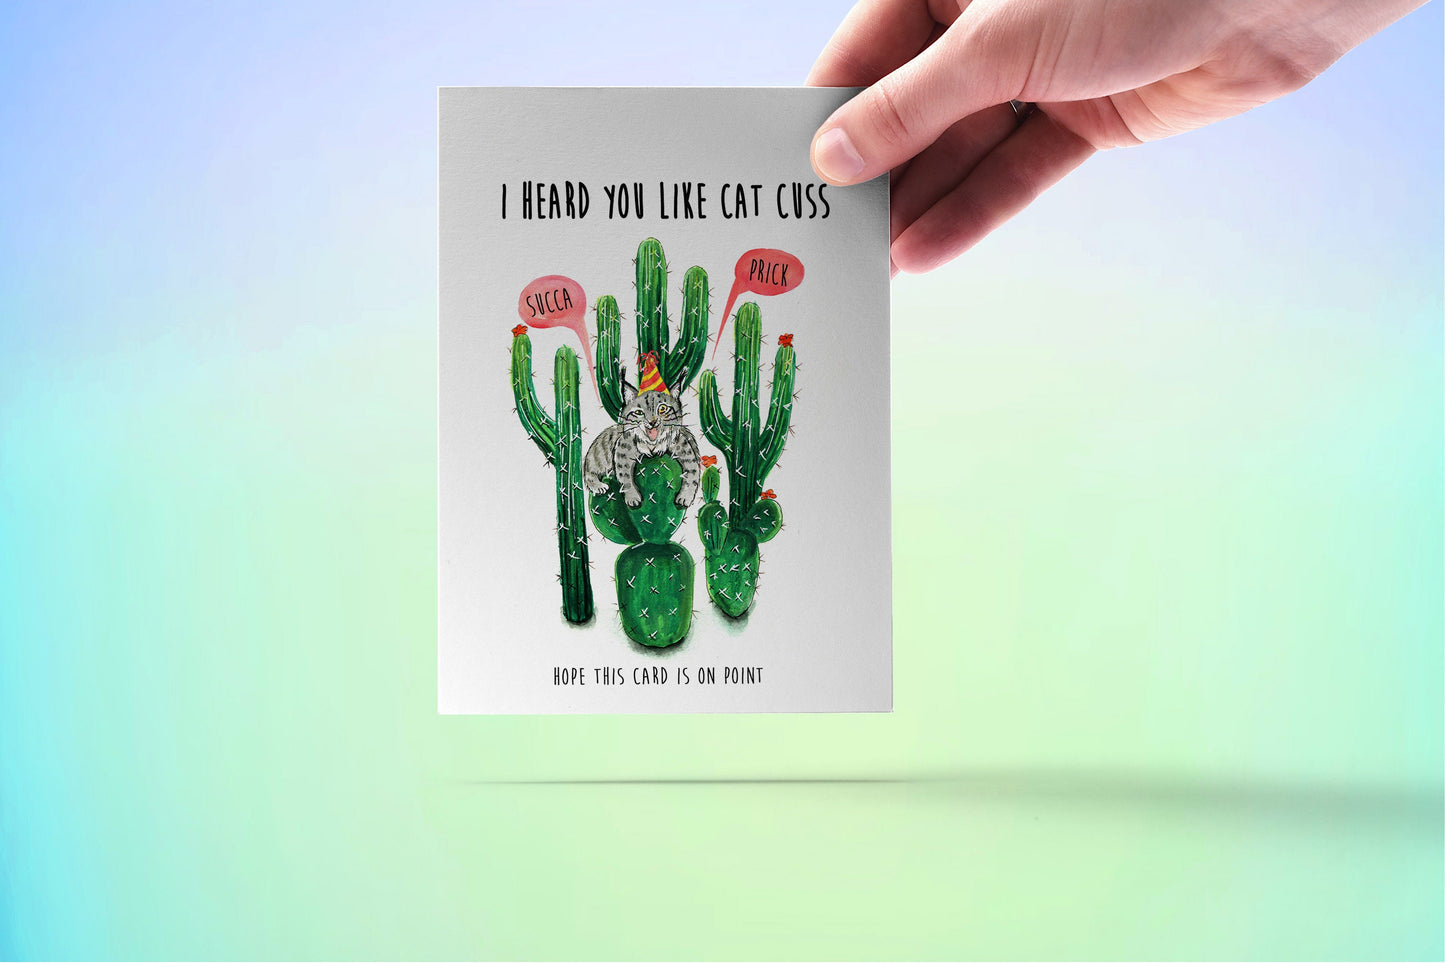 Funny Cat Birthday Cards For Friend - Lynx Cactus Card - Sucker Prick Cuss Card For Him